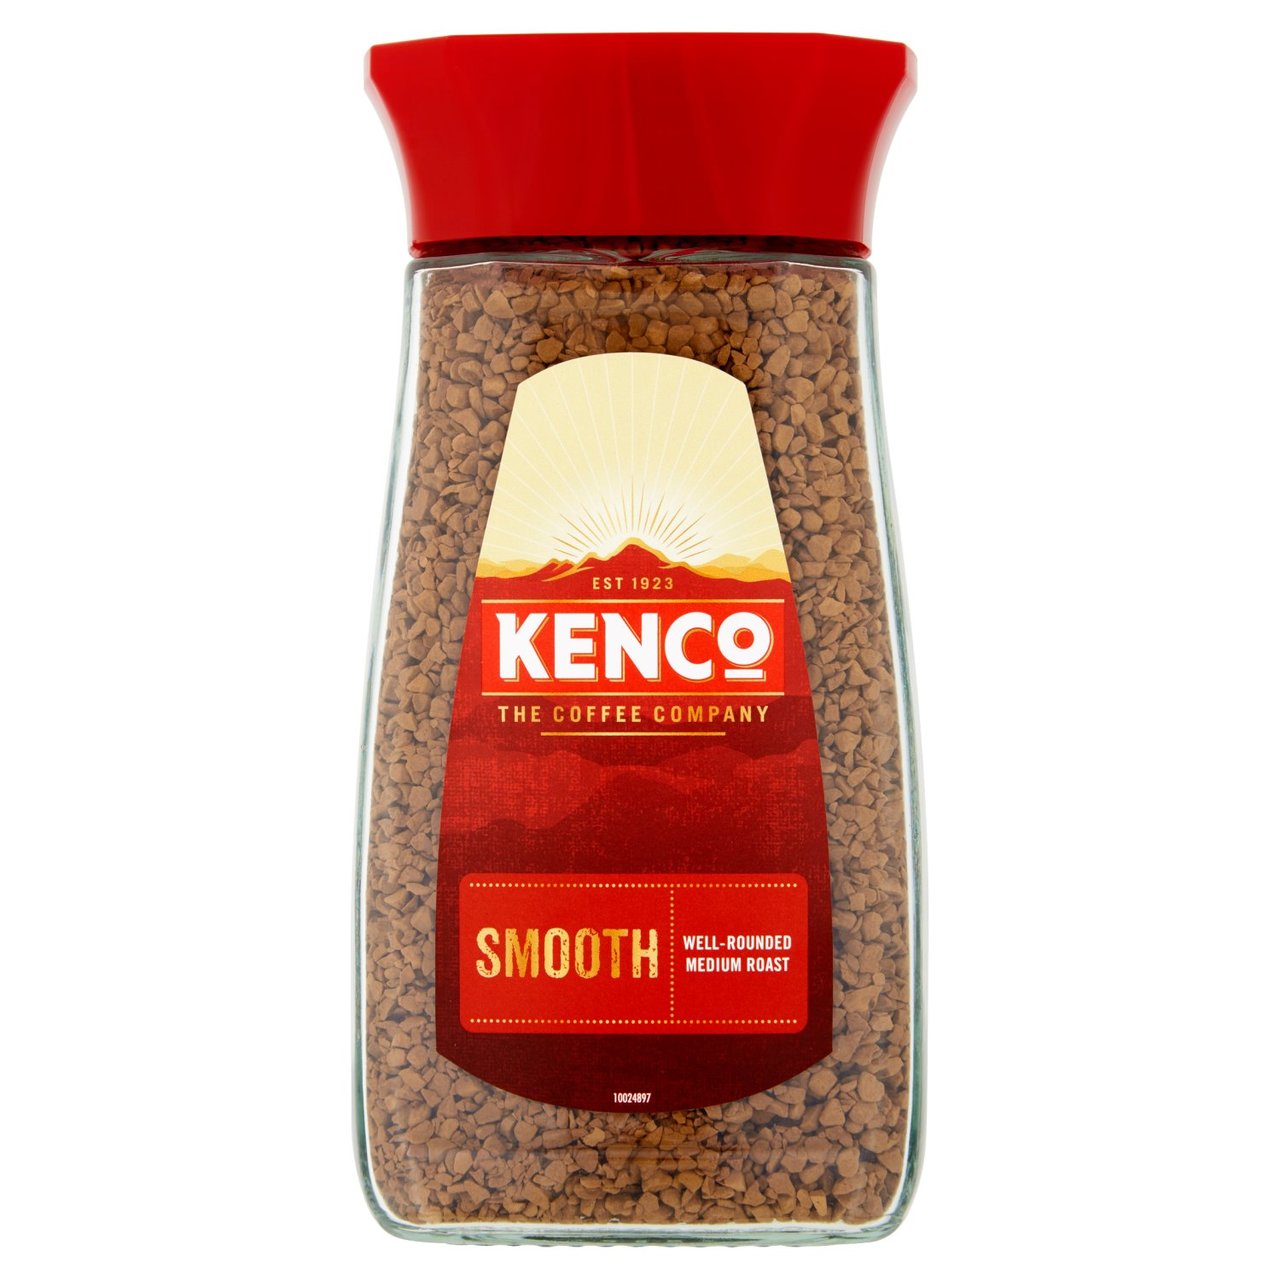 Kenco Smooth Instant Coffee 200g